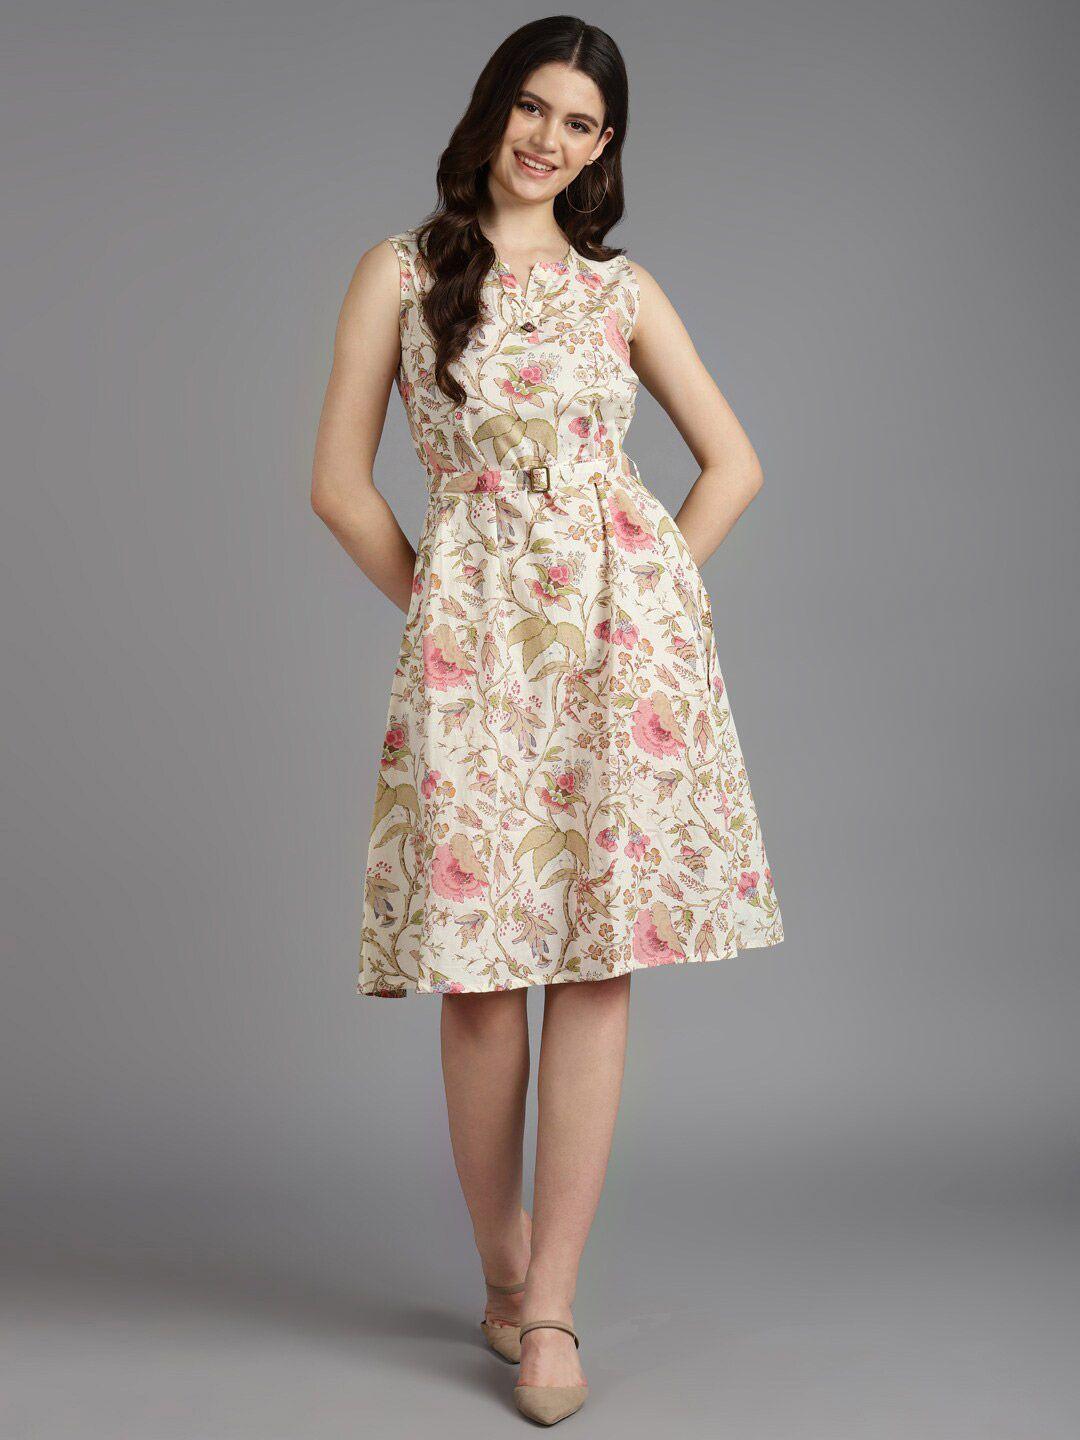 zari-floral-printed-round-neck-sleeveless-cotton-casual-a-line-dress